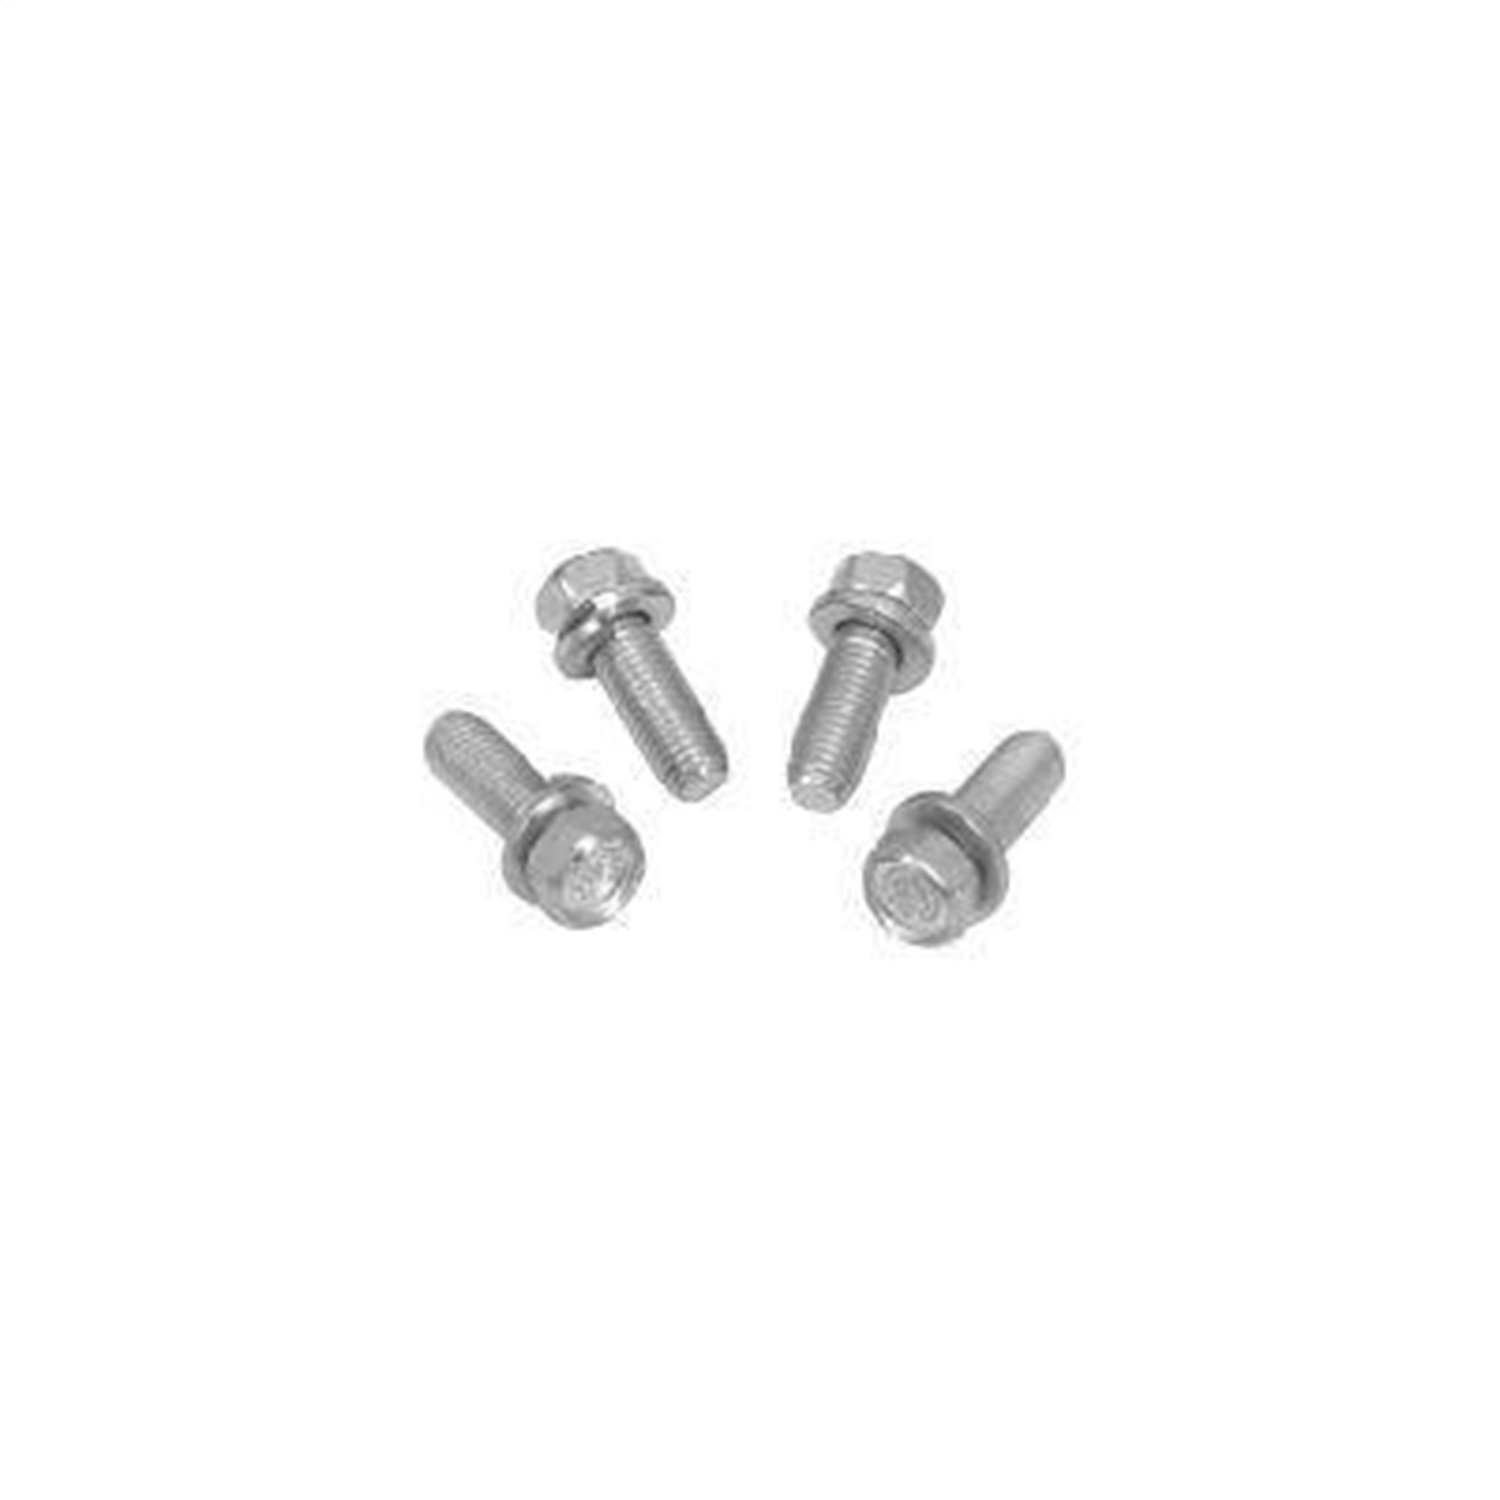 C5OE-1804 Clutch Fan Bolts for 1966-1973 Ford Mustang